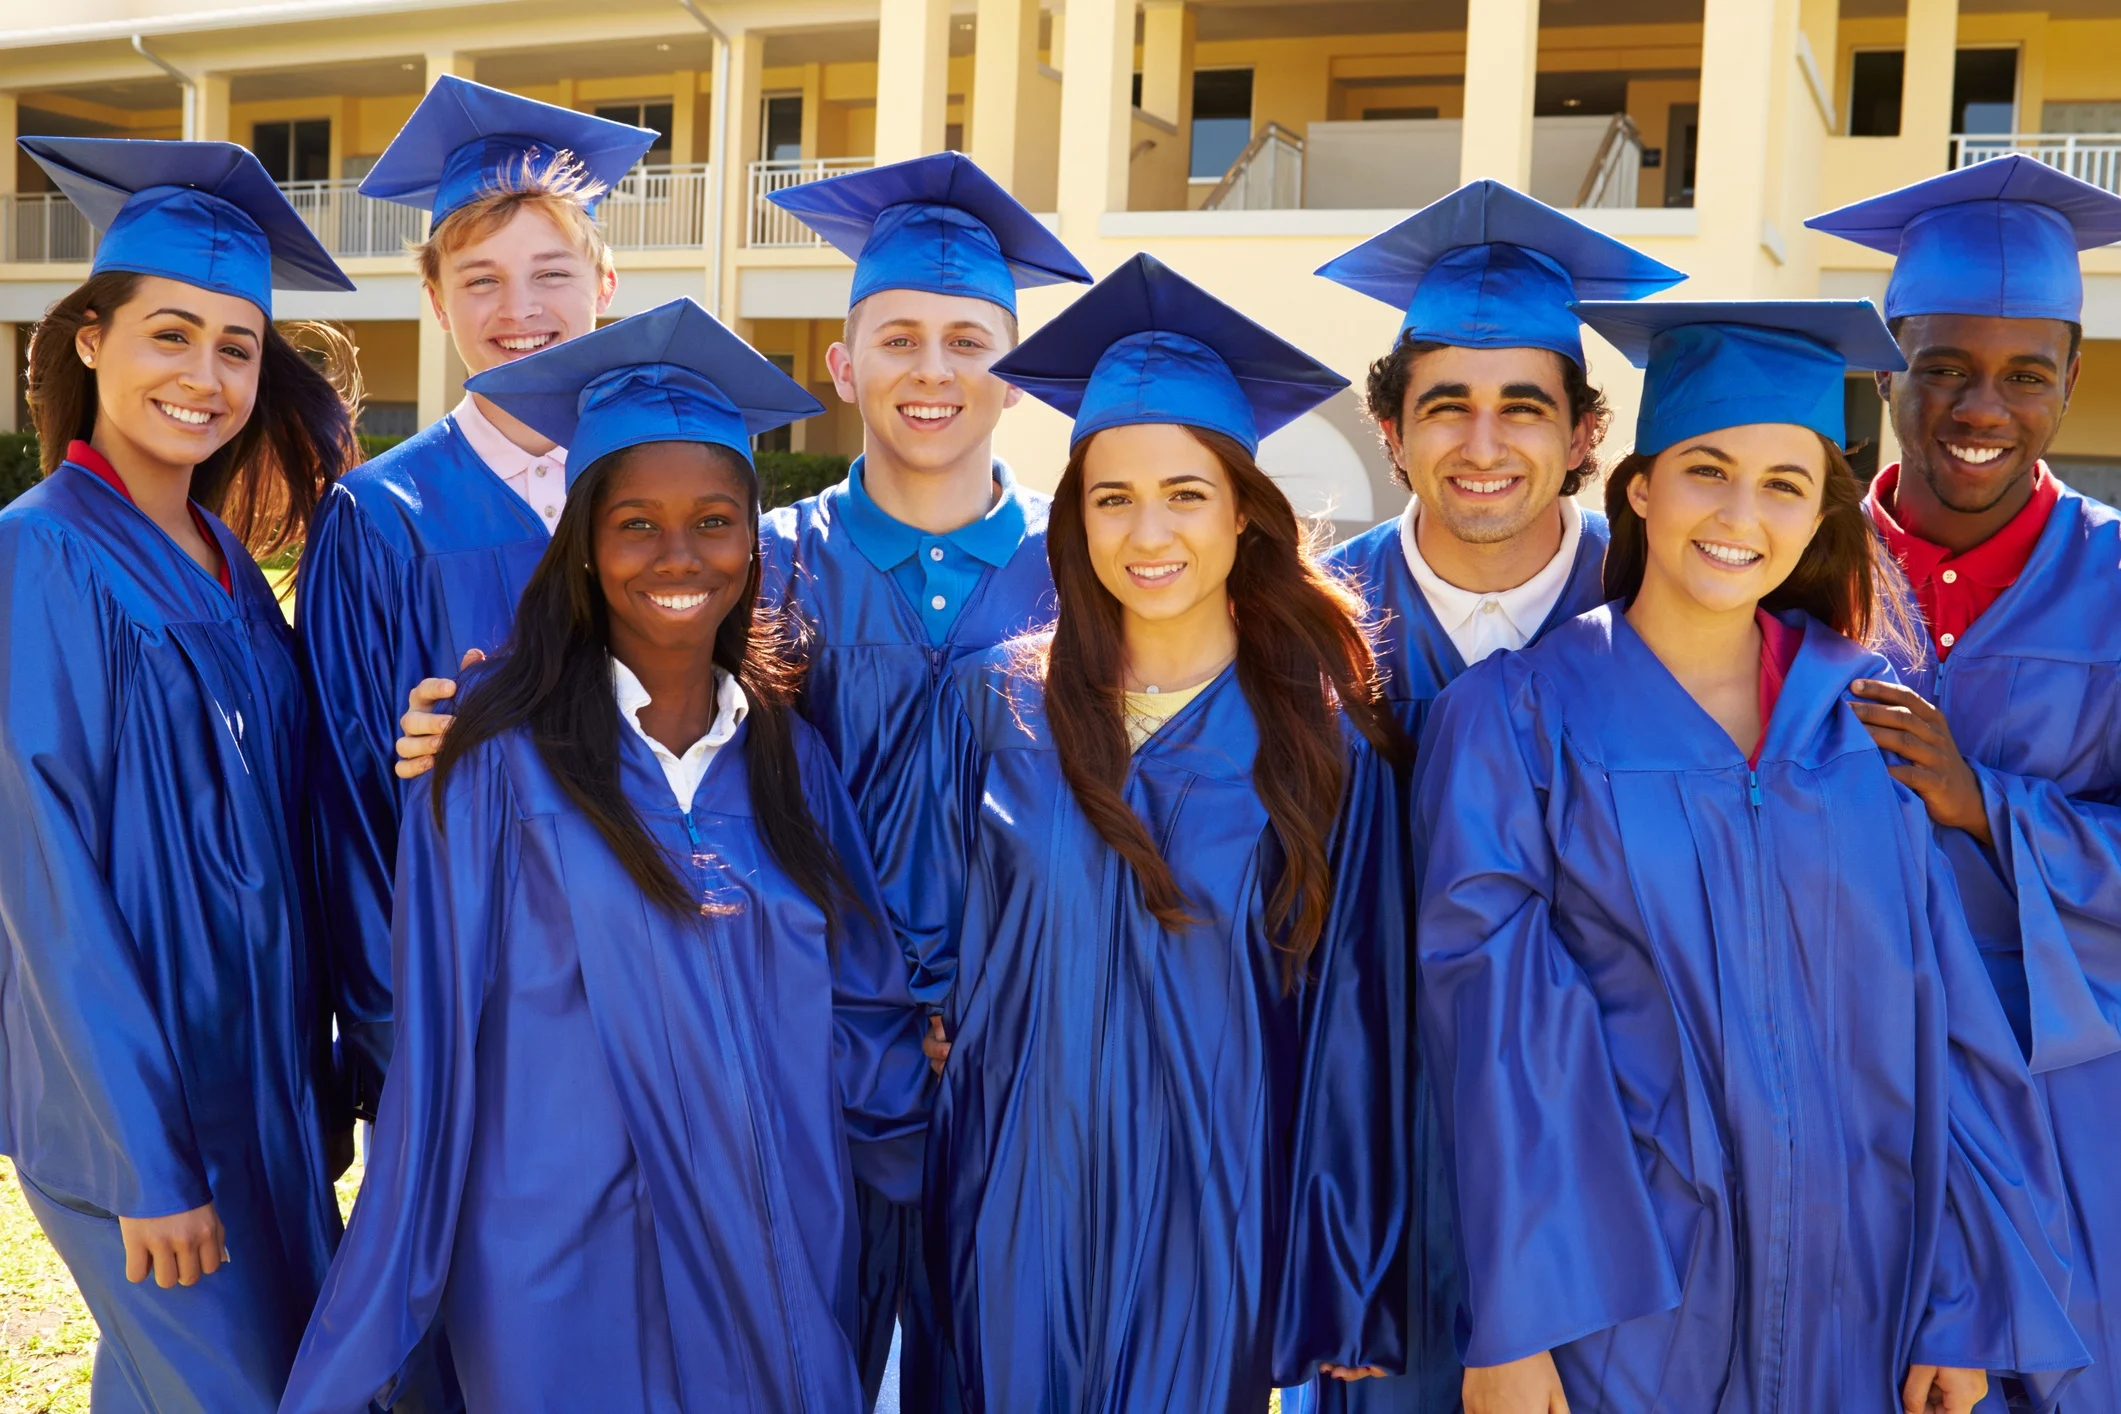 High school graduation rates here exceed Florida state average despite COVID-19 pandemic